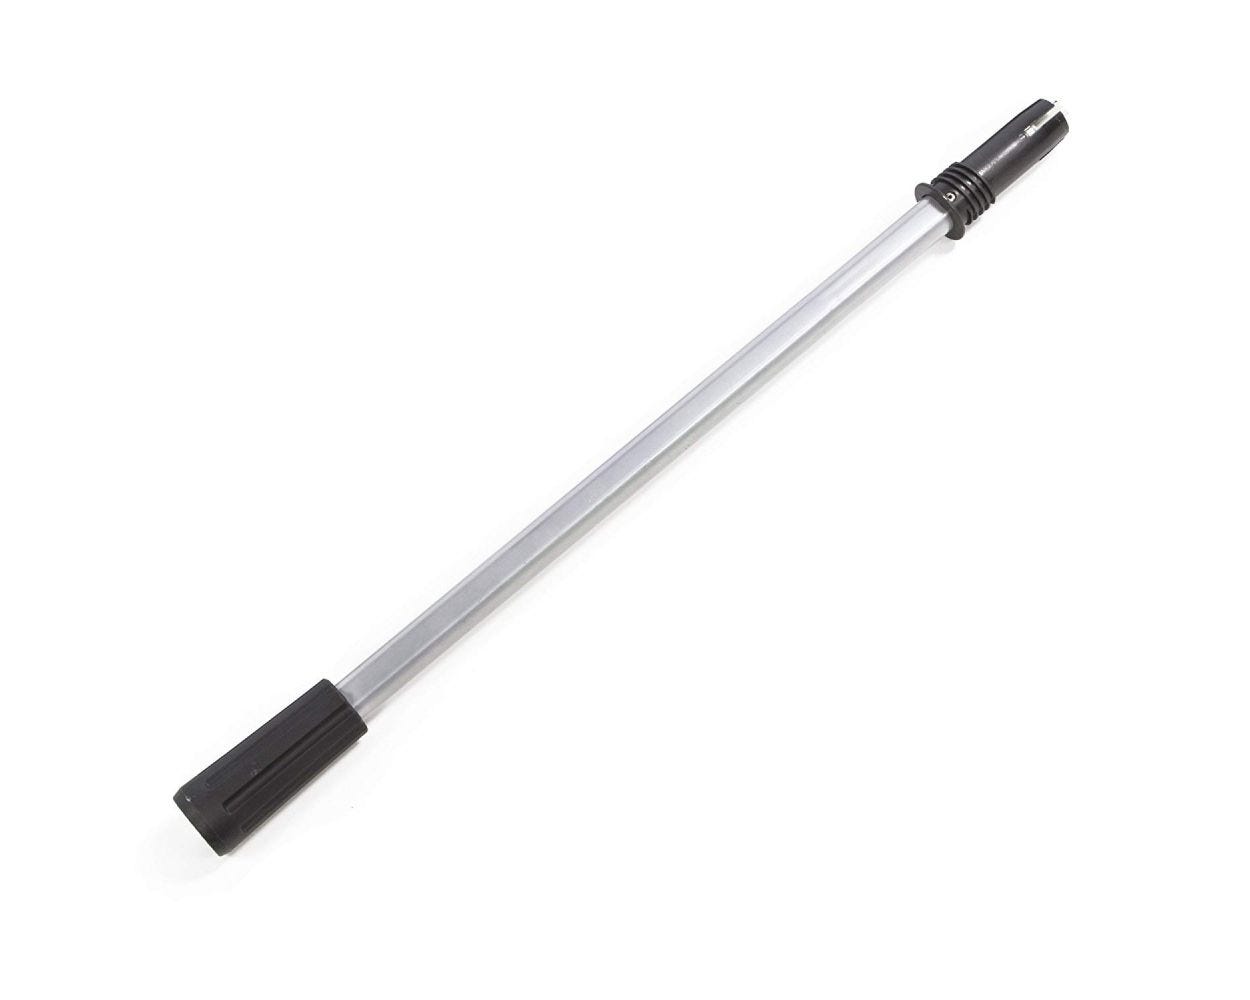 2.6-Foot Extension Pole for Pole Saw / Hedge Trimmer | Greenworks